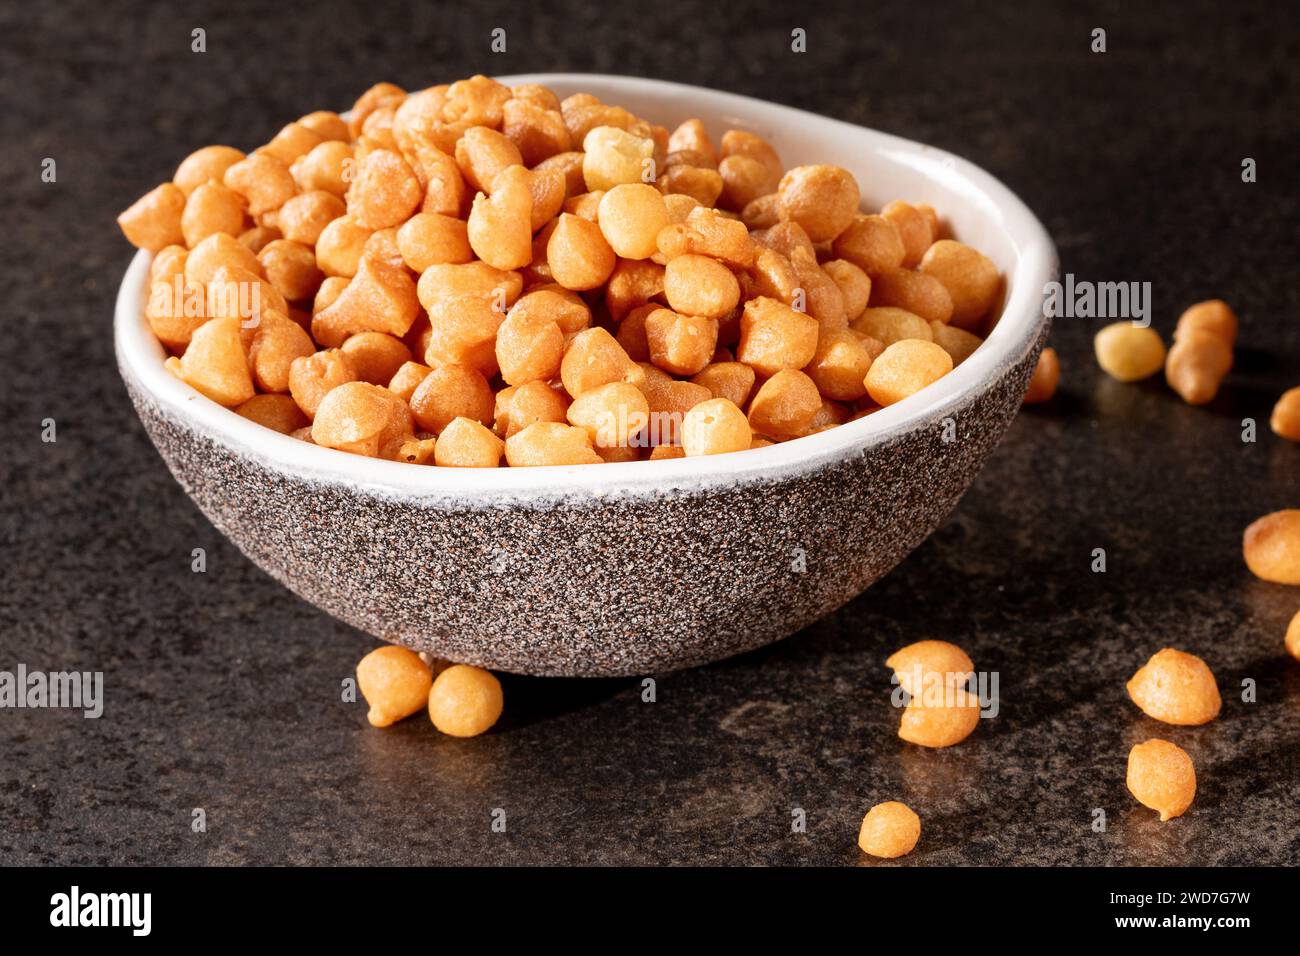 Delicious soup filling a bowl with snack product on dark background Stock Photo